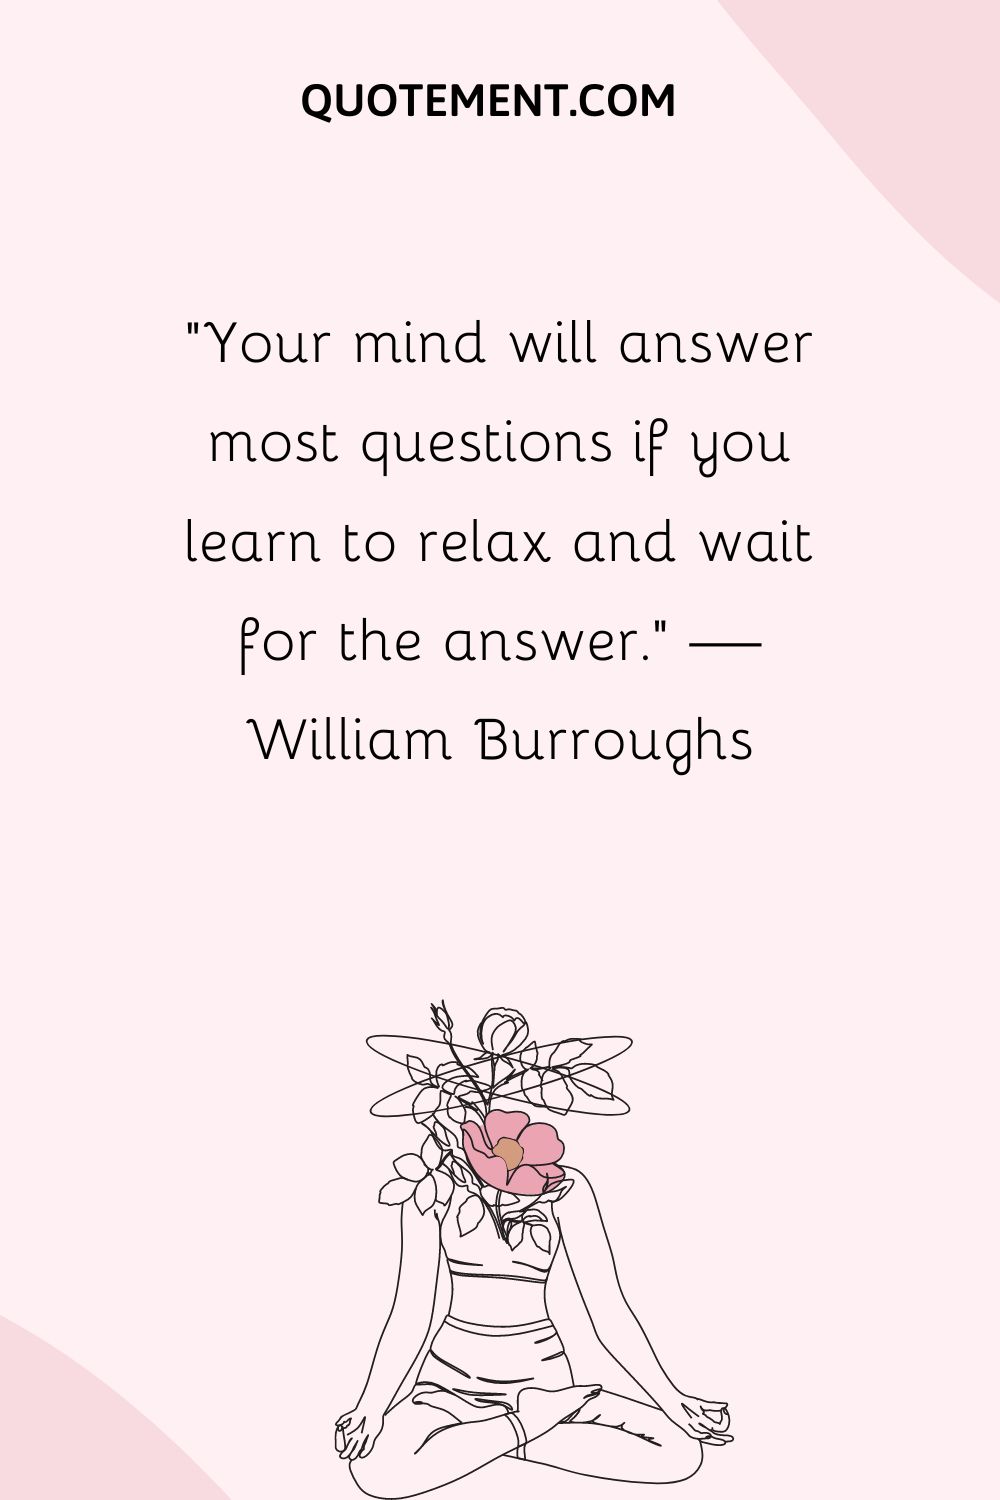 Your mind will answer most questions if you learn to relax and wait for the answer